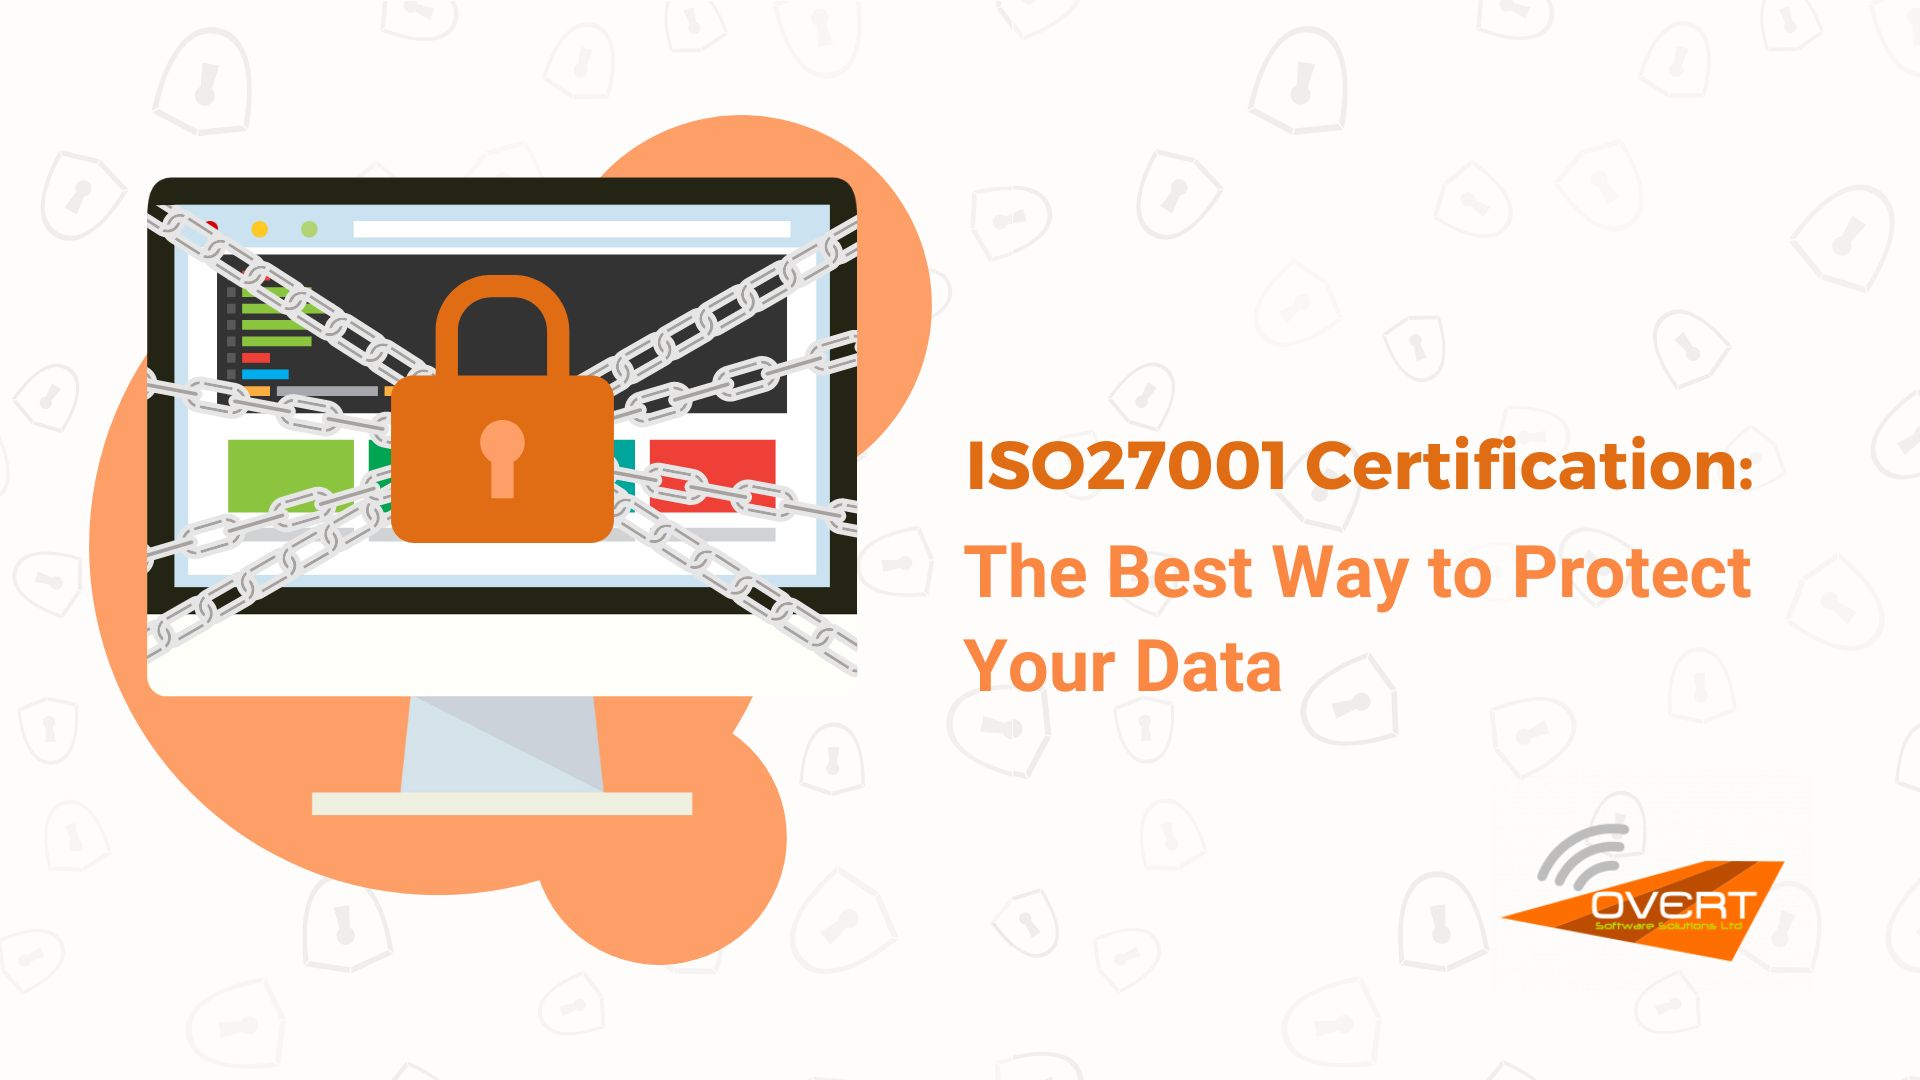 Iso27001 Certification_ The best way to protect your data blogpost Feature image by Overt Software Solution